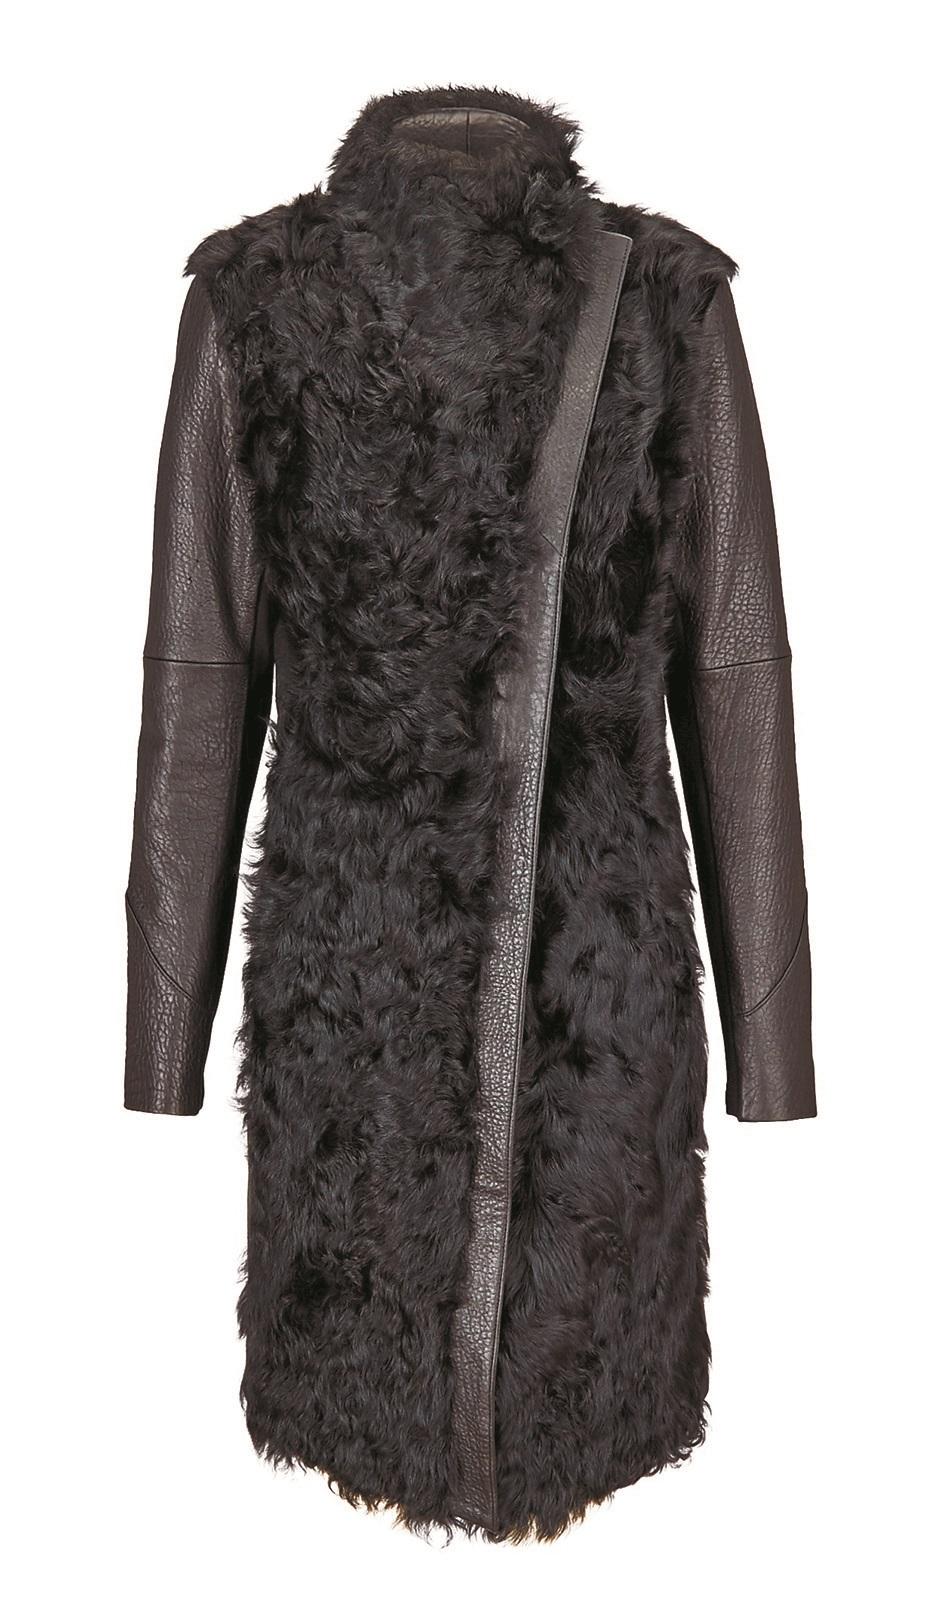 V by Very, Leather and Shearling Jacket, £350